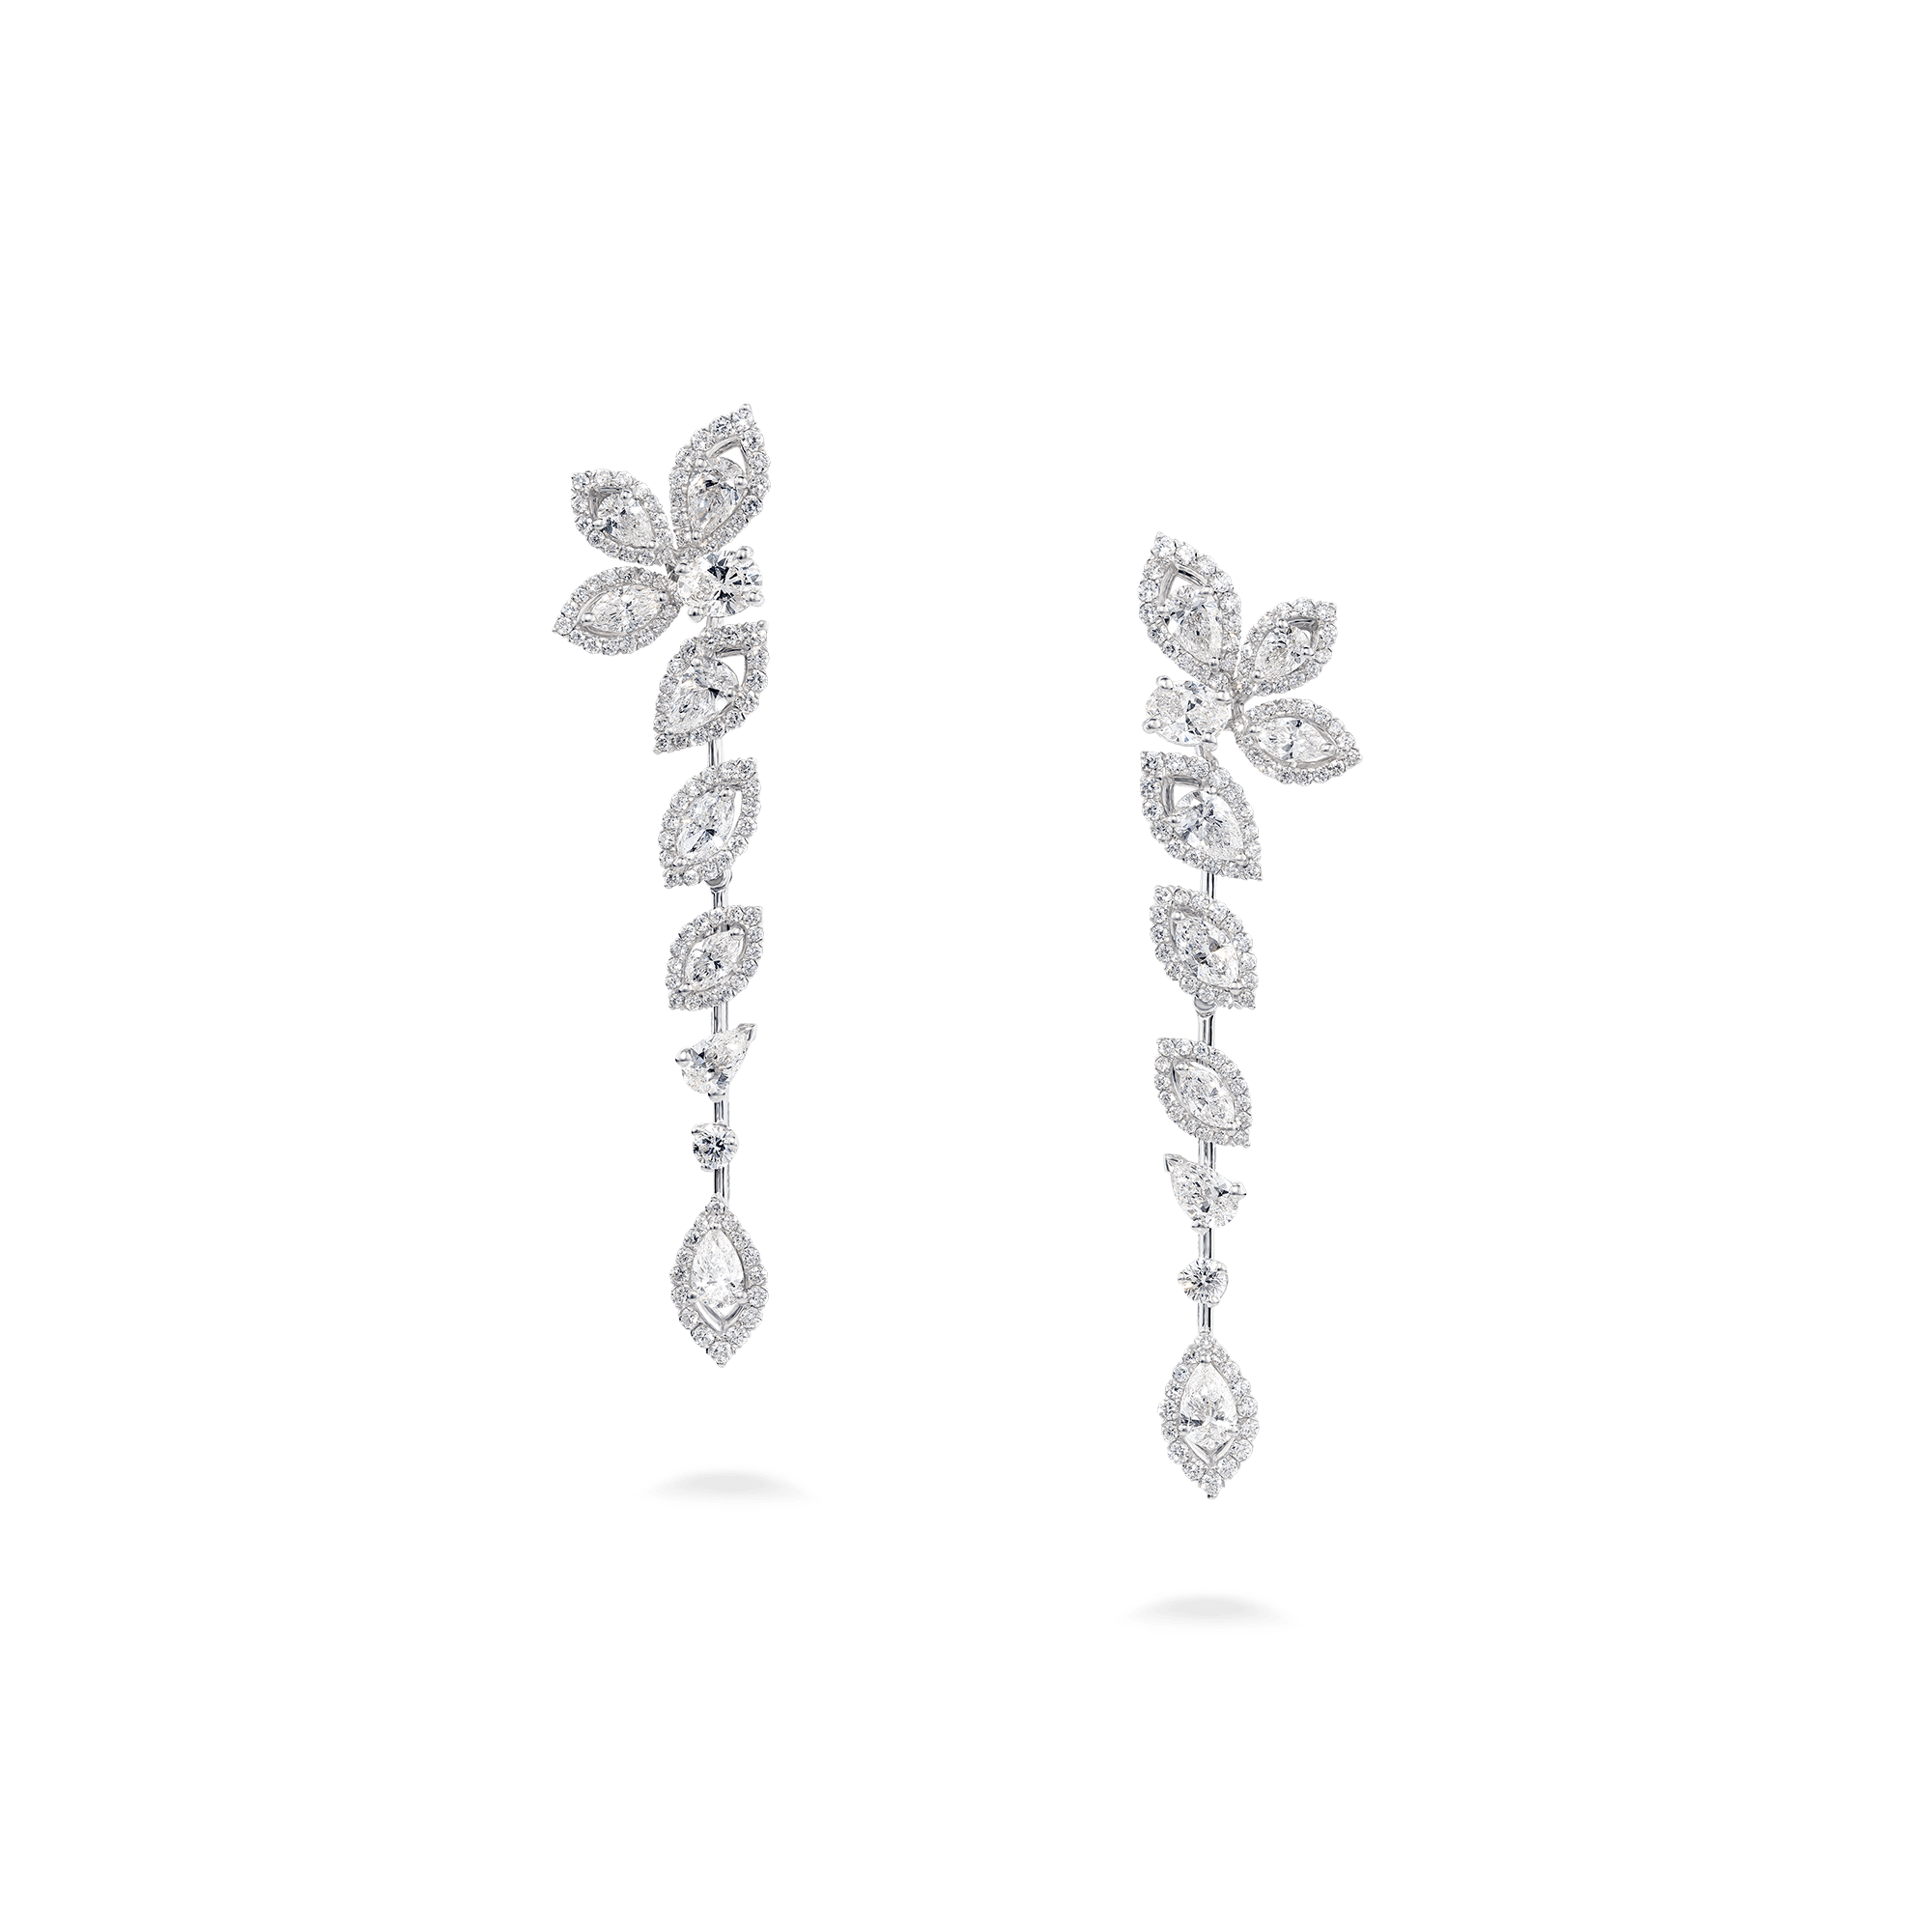 David Morris - The London Jeweller - Let your hands do the talking with  iconic Rose Cut diamonds. Shop these incredible pieces online now or  contact us for boutique and virtual appointment